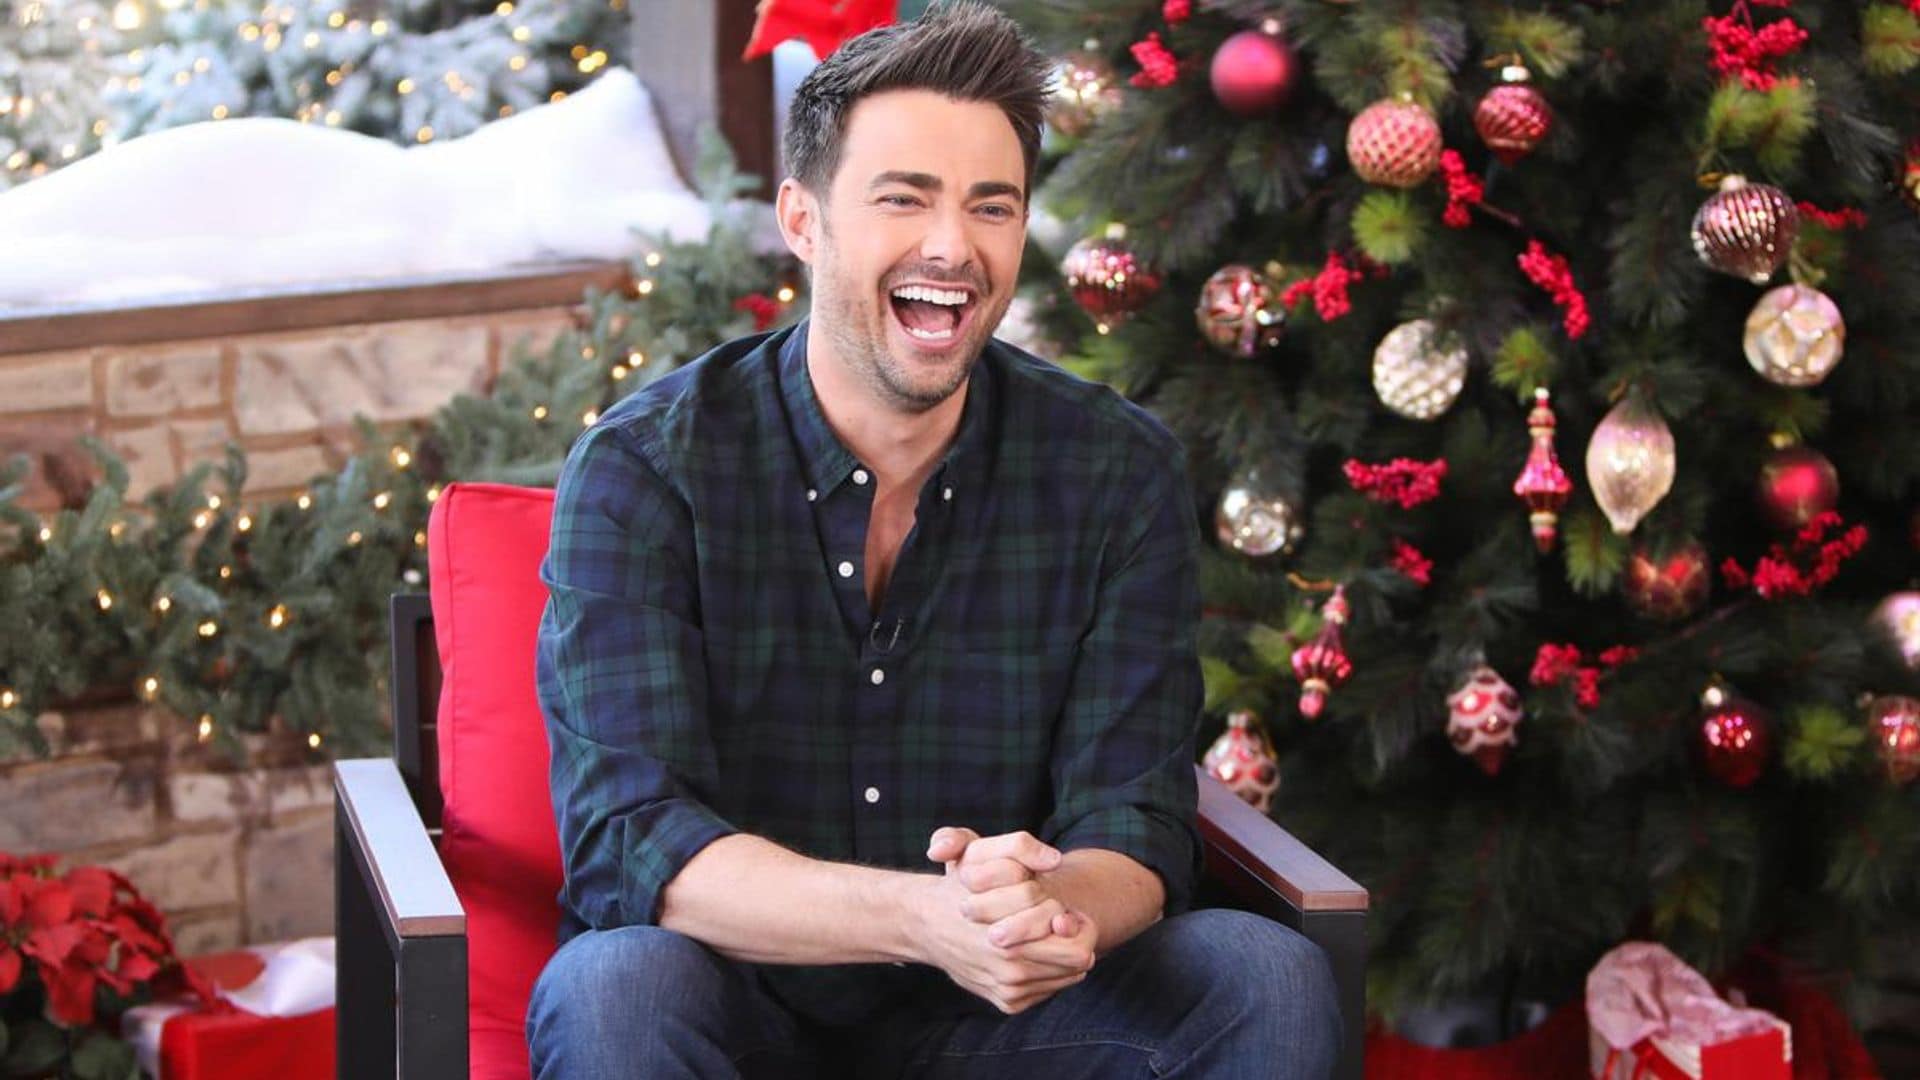 Mean Girls actor Jonathan Bennett said ‘yes’ to boyfriend Jaymes Vaughan